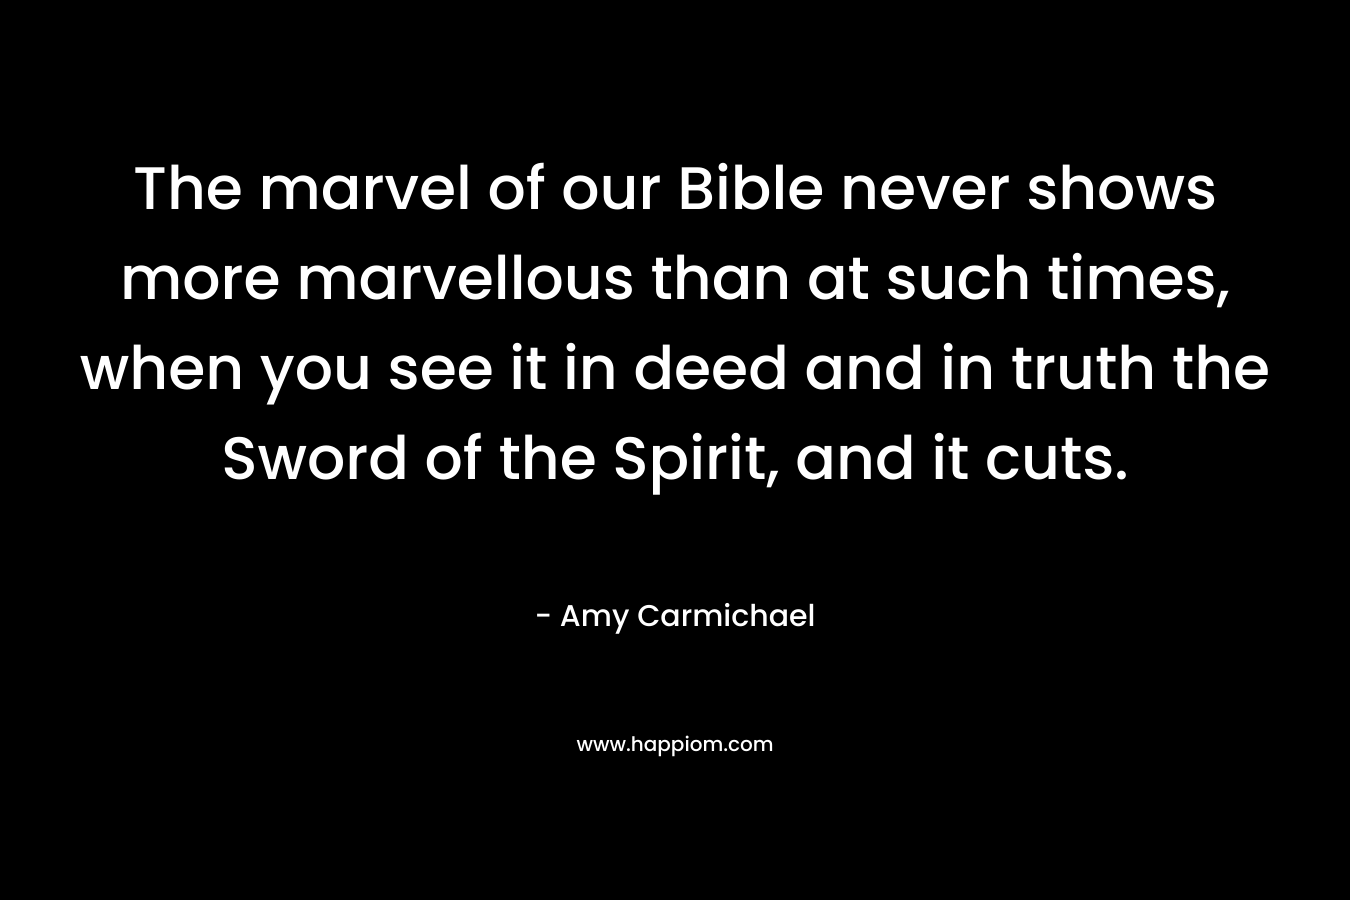 The marvel of our Bible never shows more marvellous than at such times, when you see it in deed and in truth the Sword of the Spirit, and it cuts. – Amy Carmichael